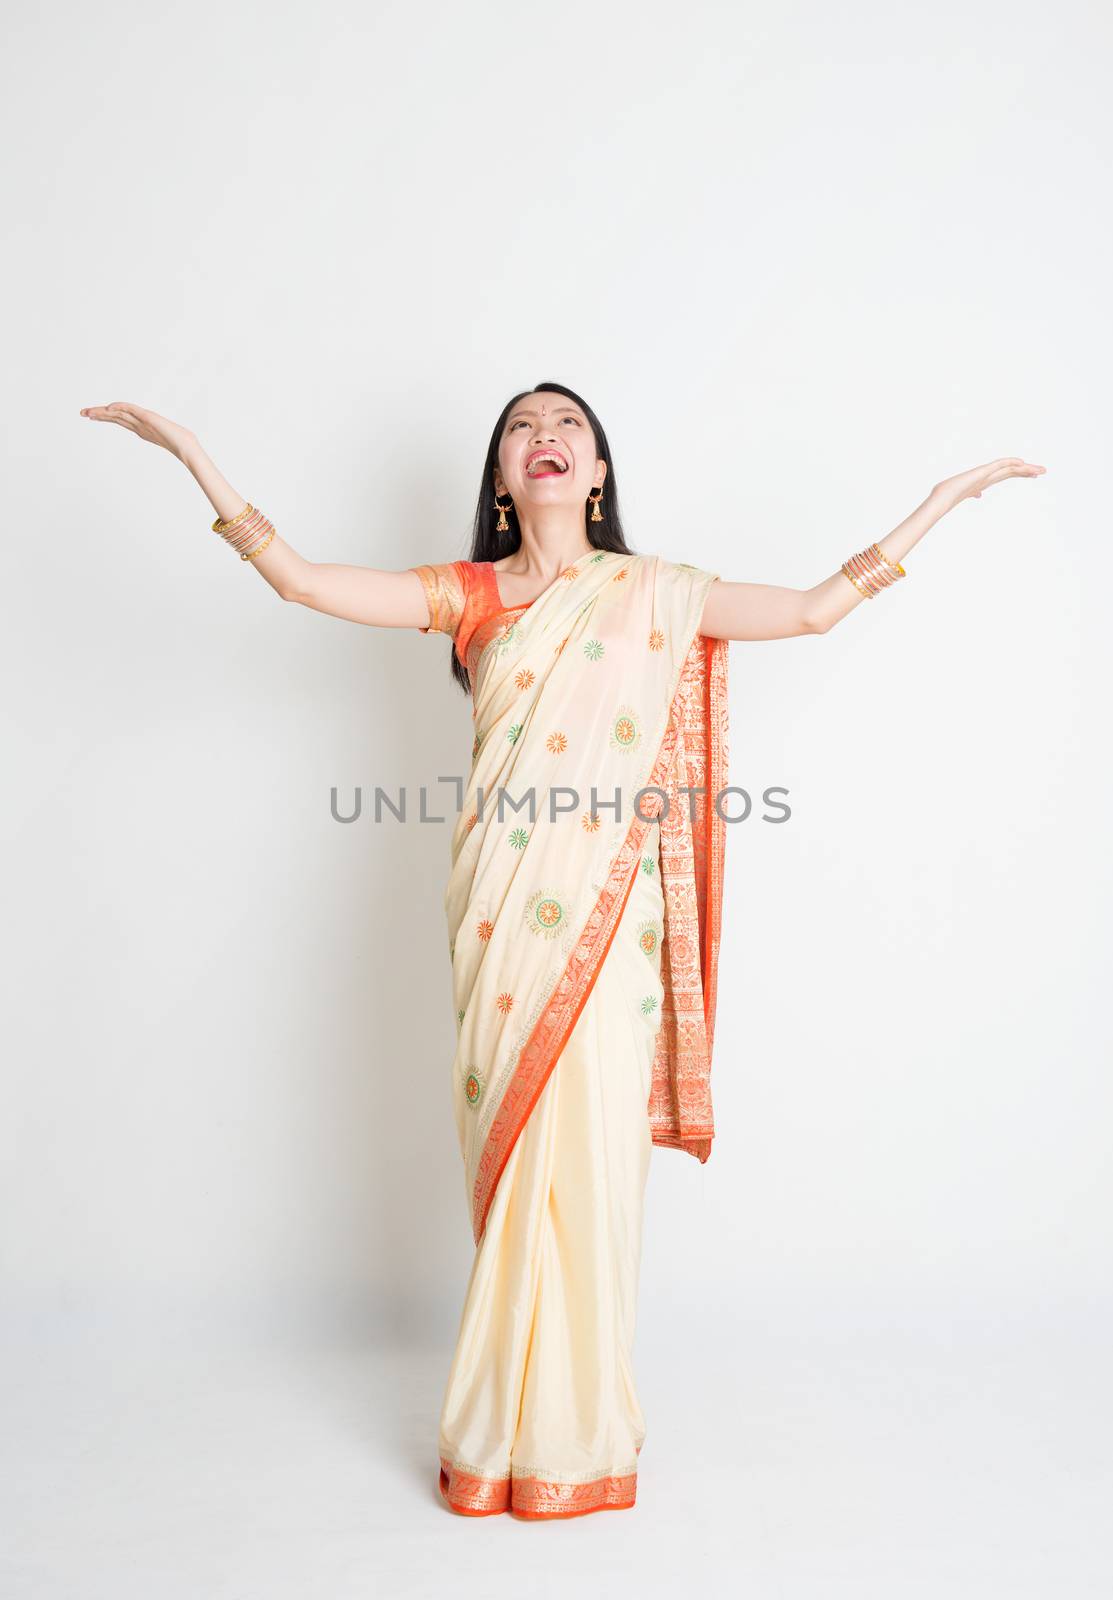 Portrait of young mixed race Indian Chinese woman in traditional sari dress hands raised looking upwards and smiling, full length on plain background.